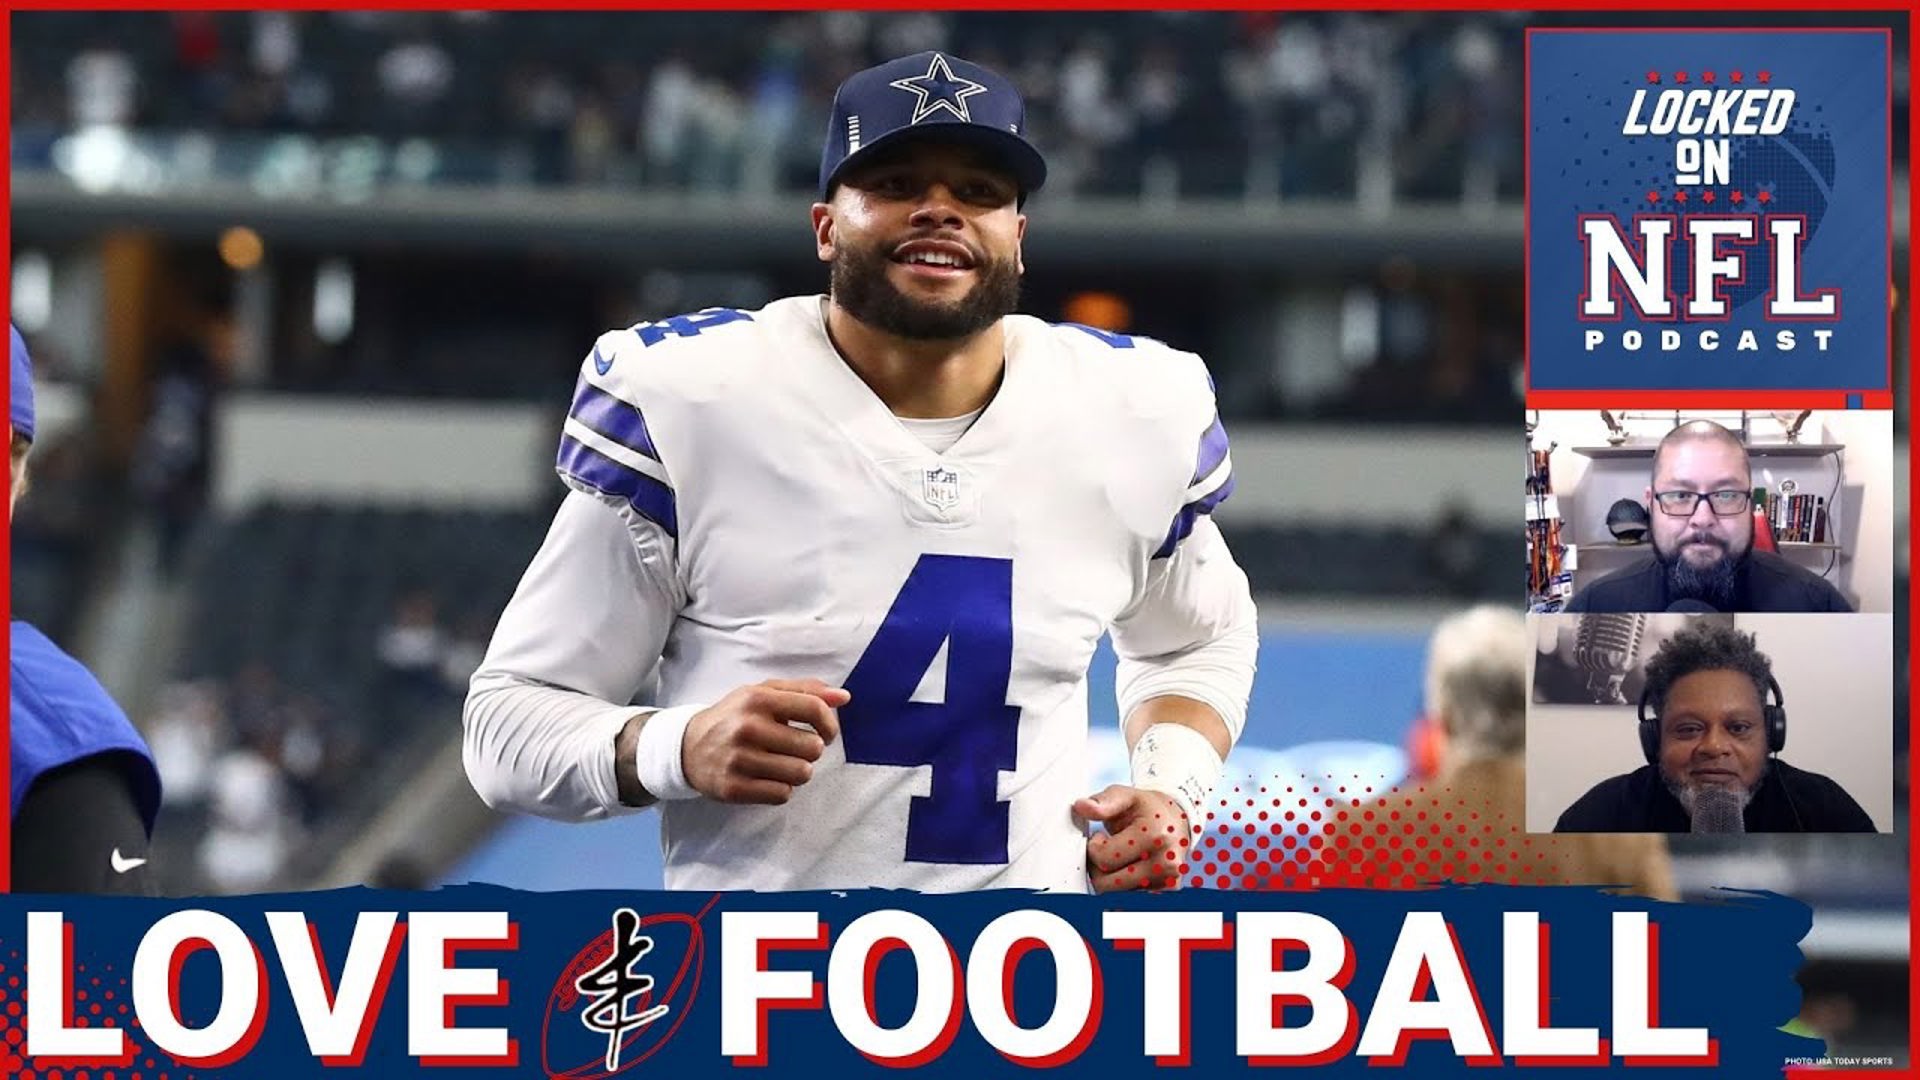 Dallas Cowboys quarterback Dak Prescott says he doesn't like money and would play for free. We don't buy it.